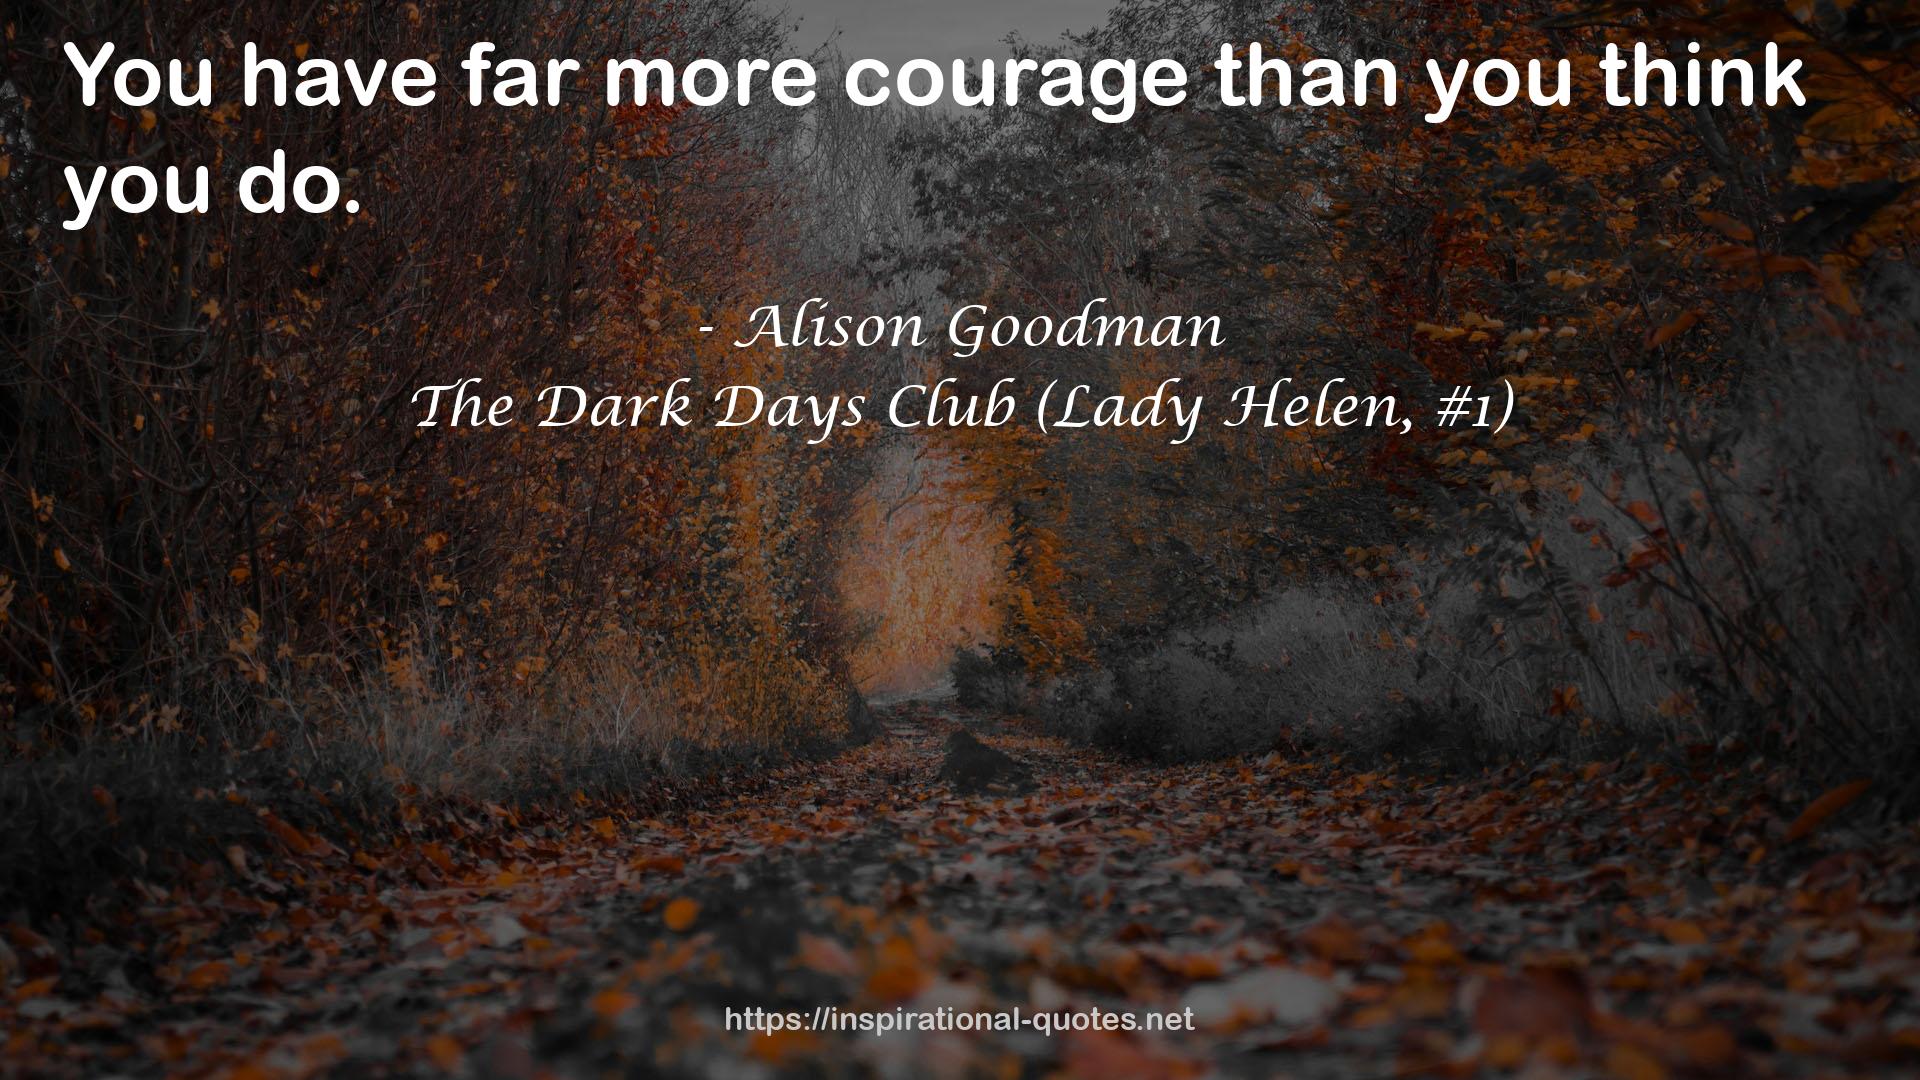 The Dark Days Club (Lady Helen, #1) QUOTES